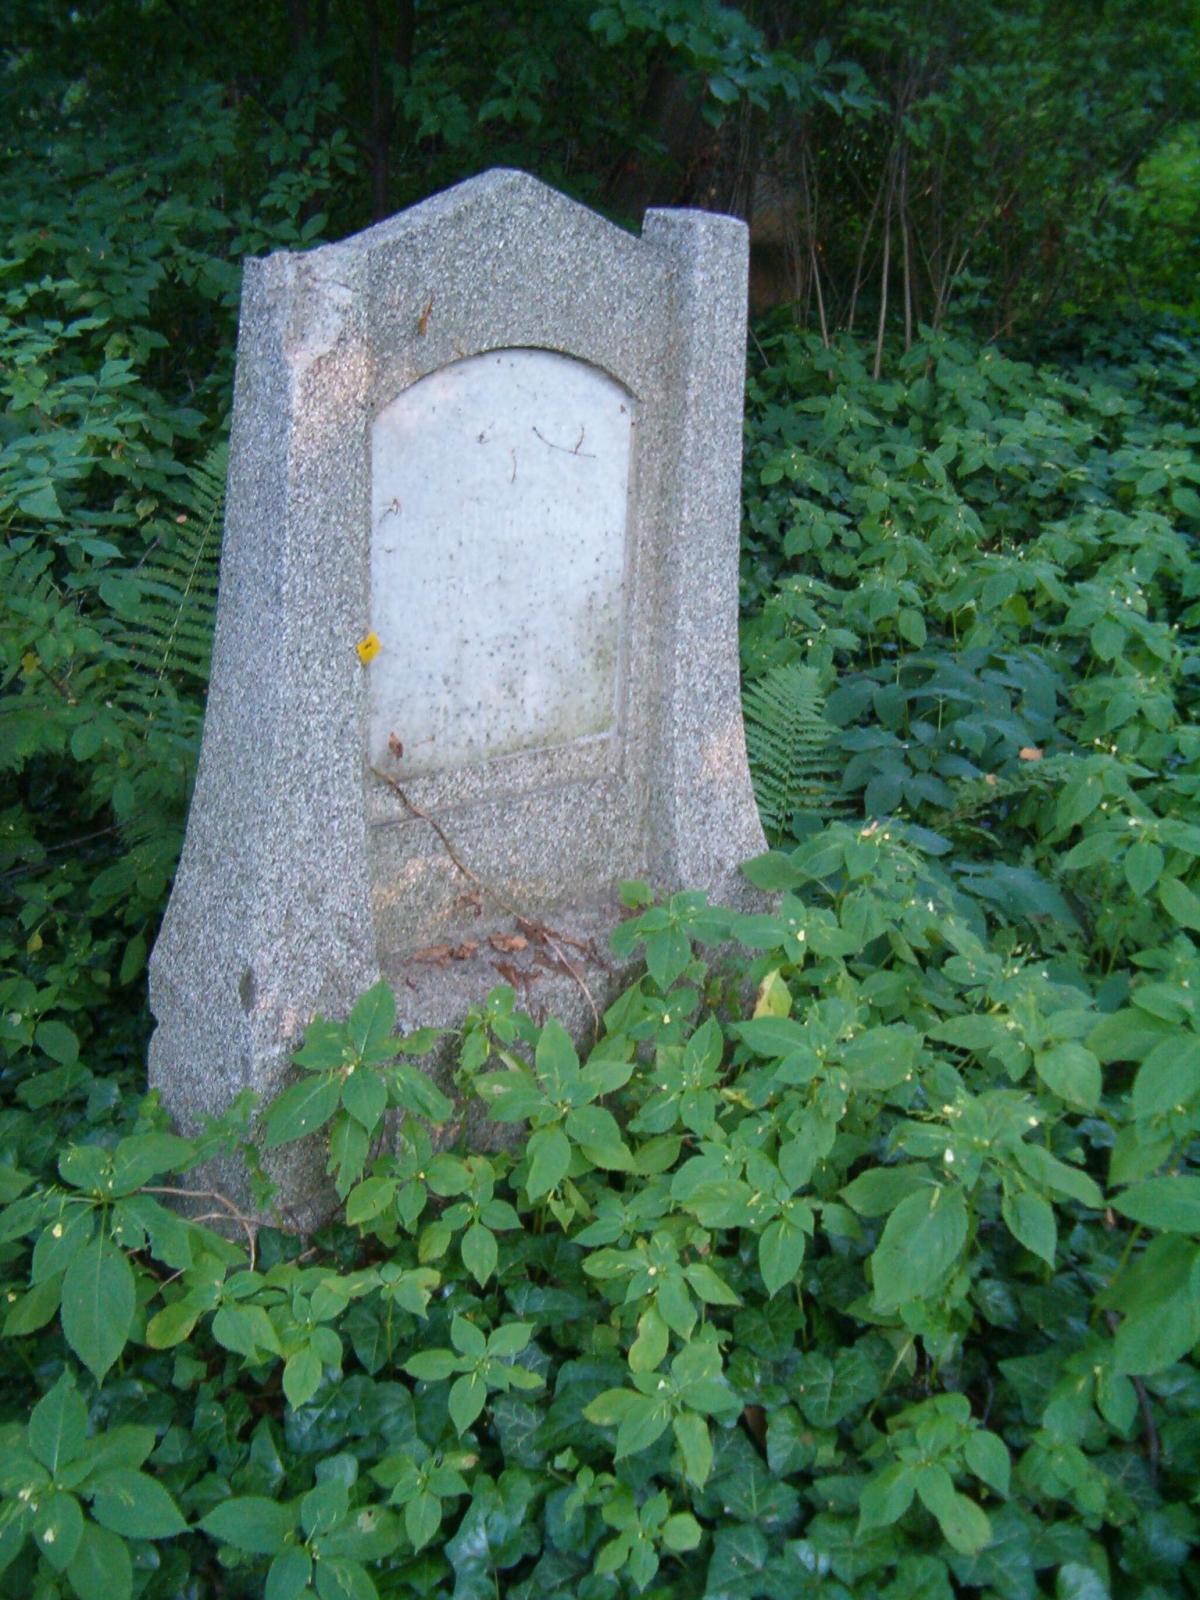 Wikipedia, Files with no machine-readable source, Images without source, Protestant cemetery in Raci